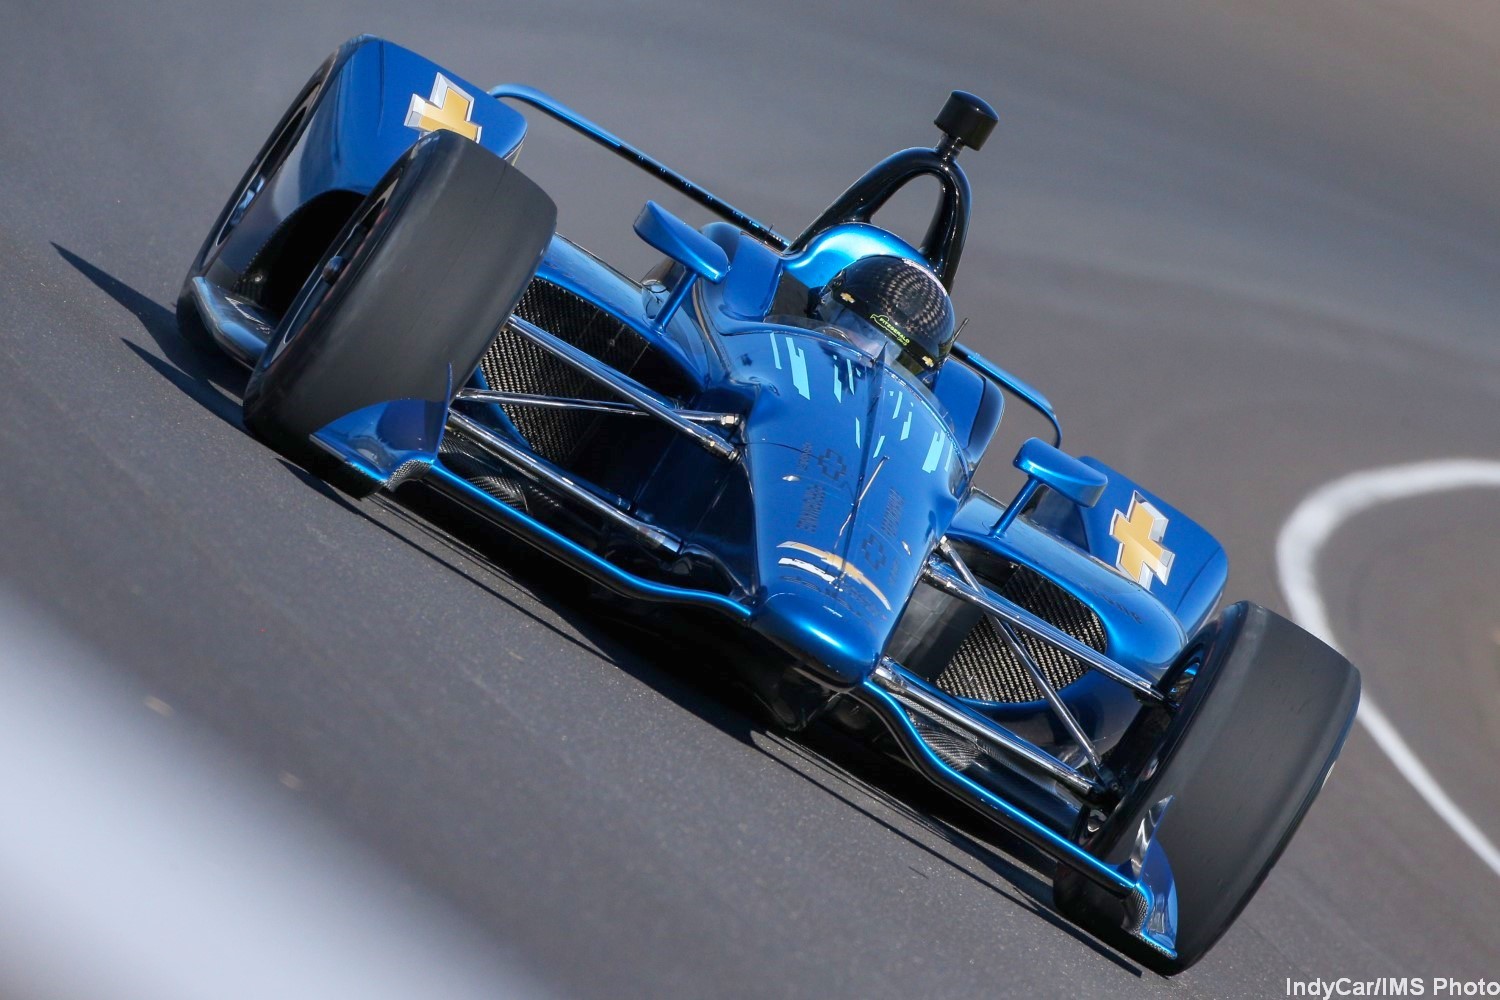 Indy testing starts this Friday